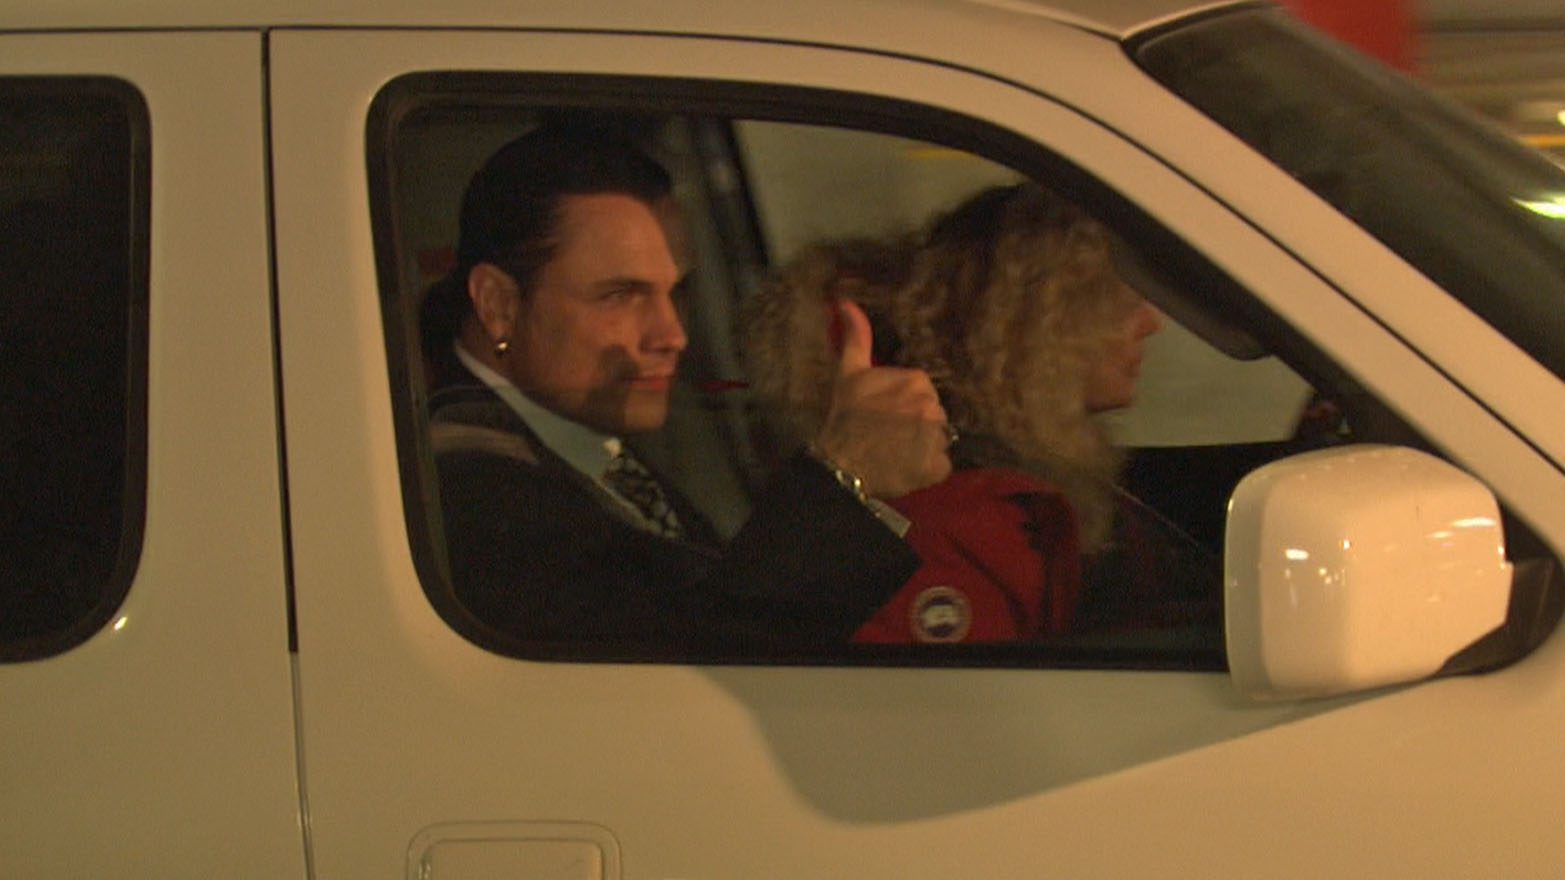 Suspended Senator Patrick Brazeau gives thumps up after trial Monday